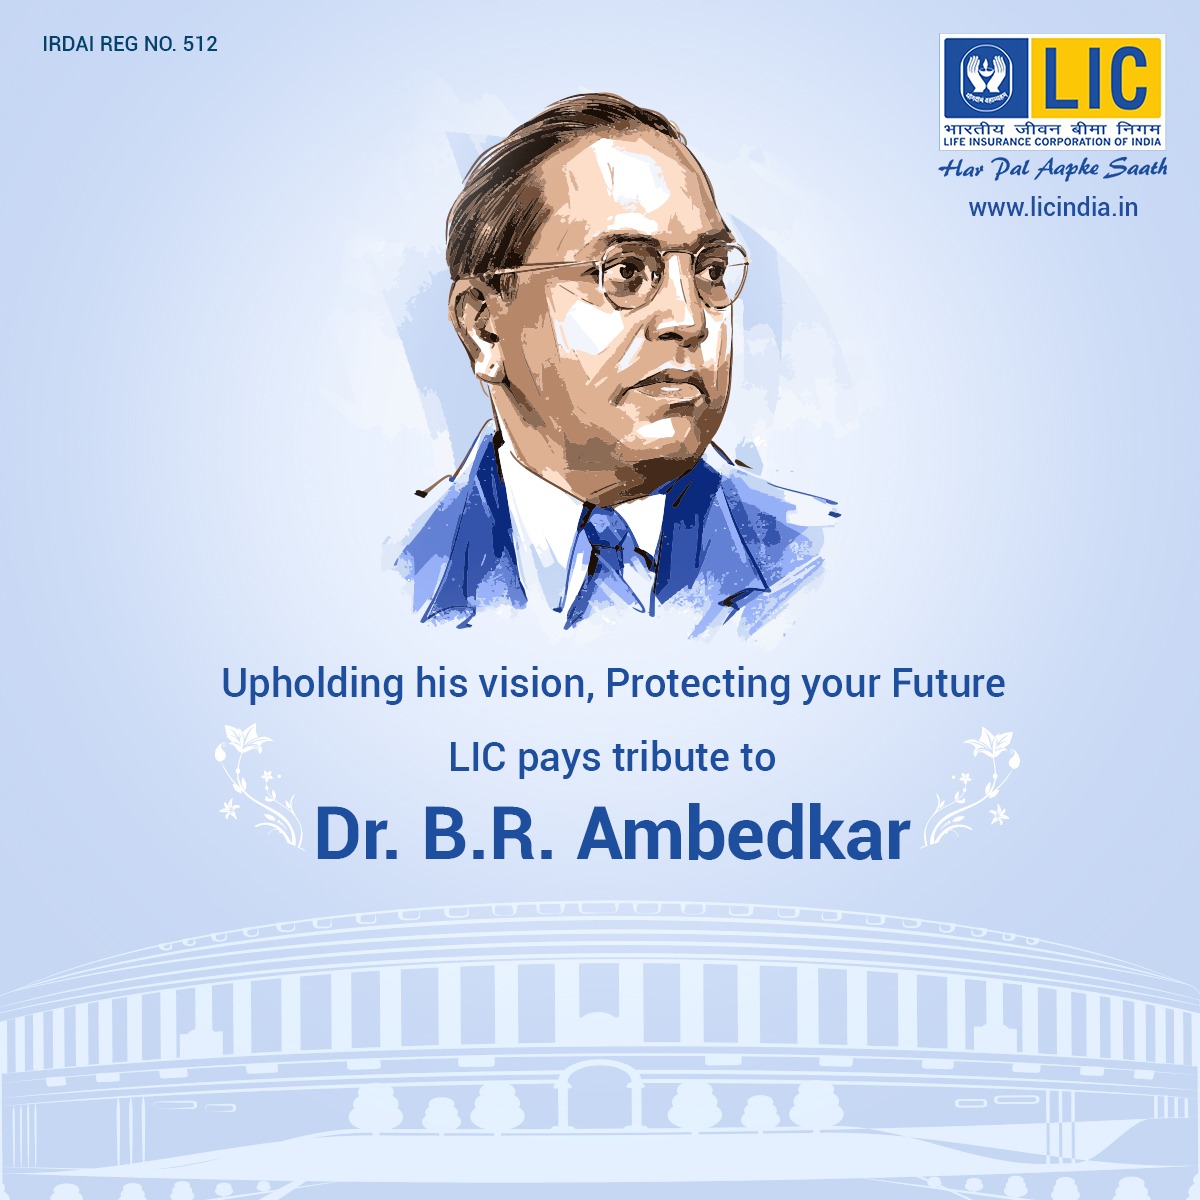 Celebrating a visionary who shaped our nation's destiny. LIC pays heartfelt tribute to Dr. B.R. Ambedkar on his Jayanti, upholding his ideals that safeguard our future